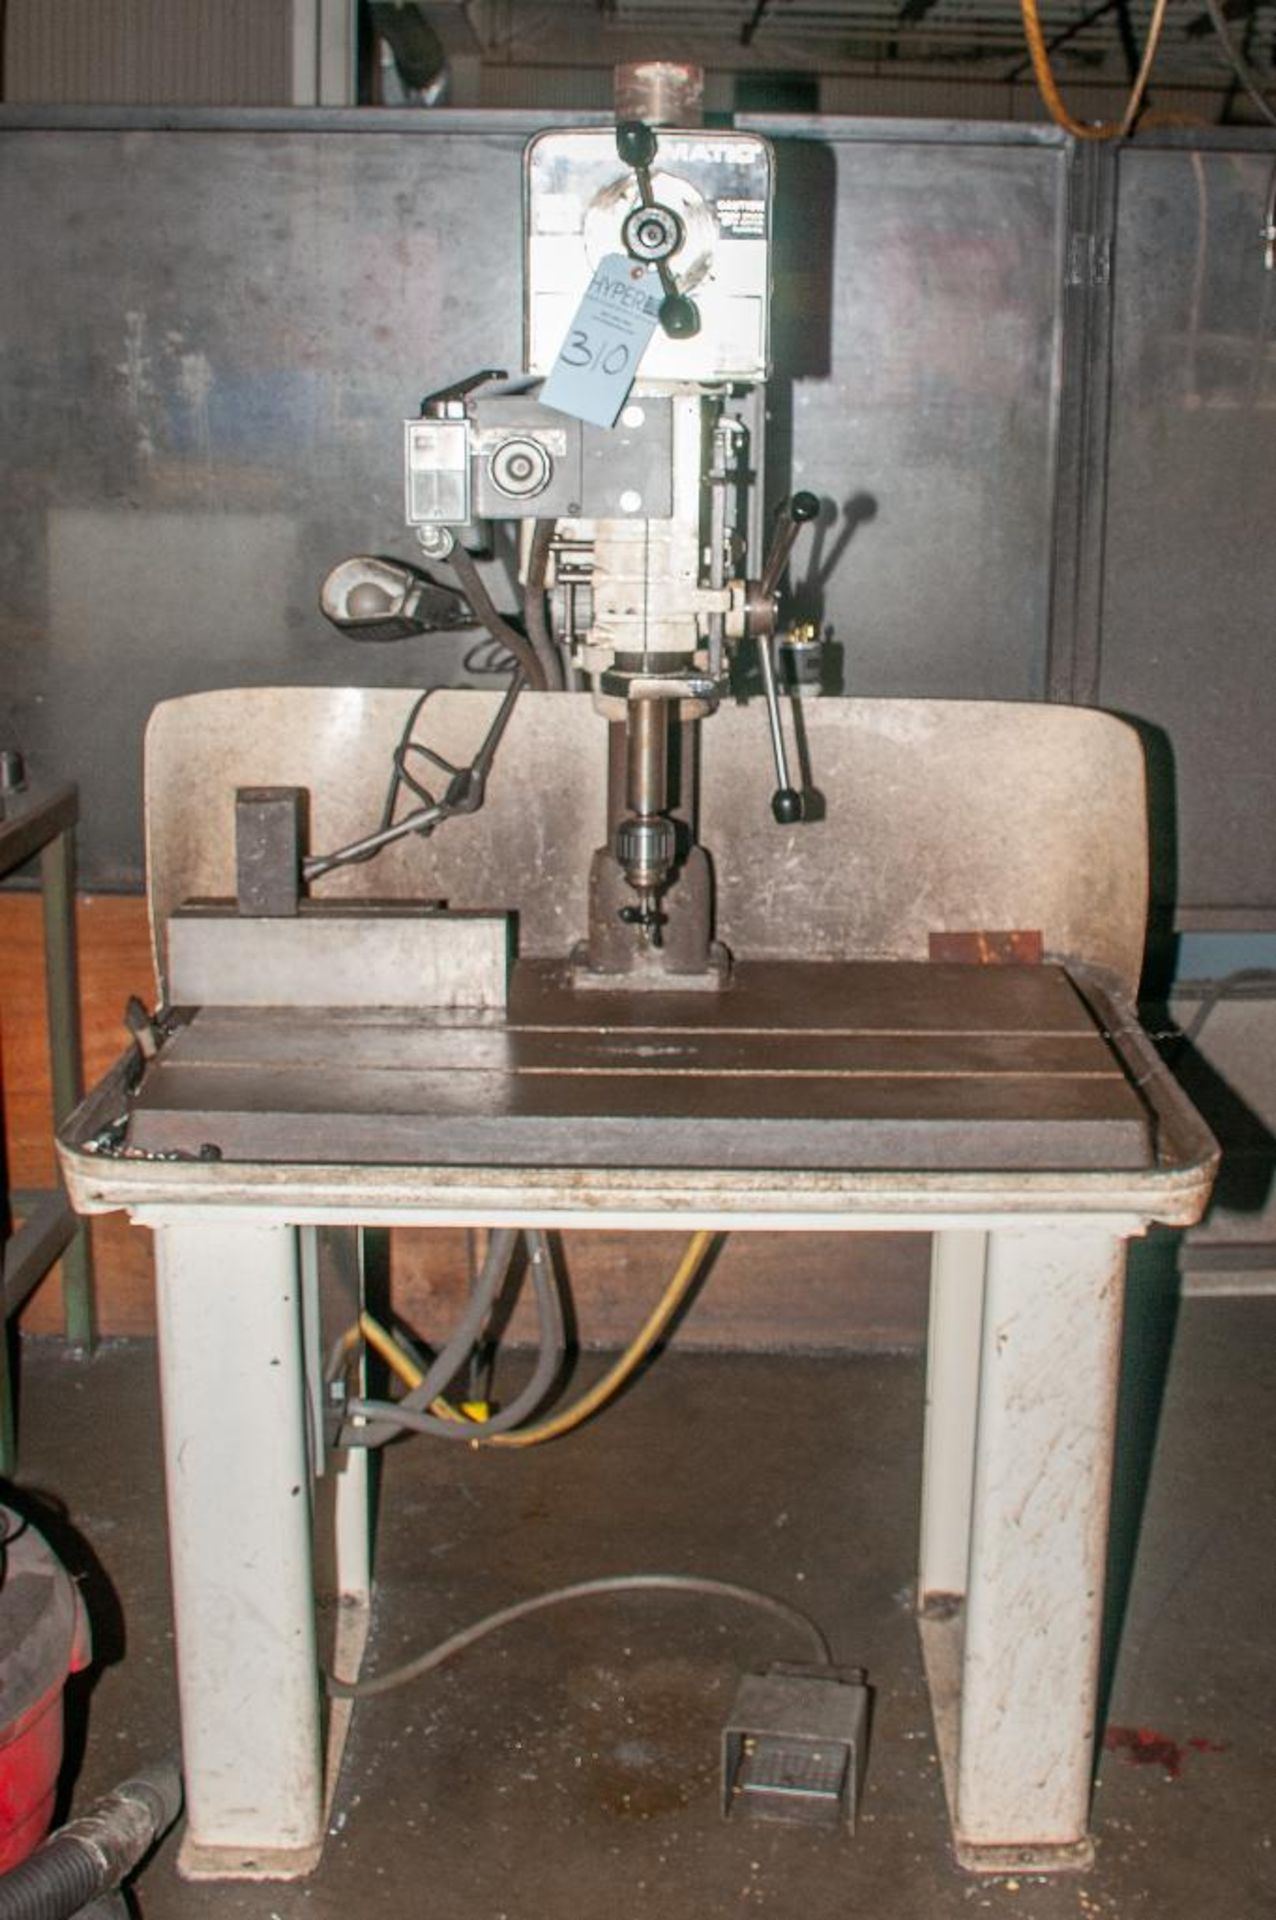 PowerMatic 20" Variable Speed Drill Press Mdl 1200, s/n 8720V242 460v On Heavy Steel Bench